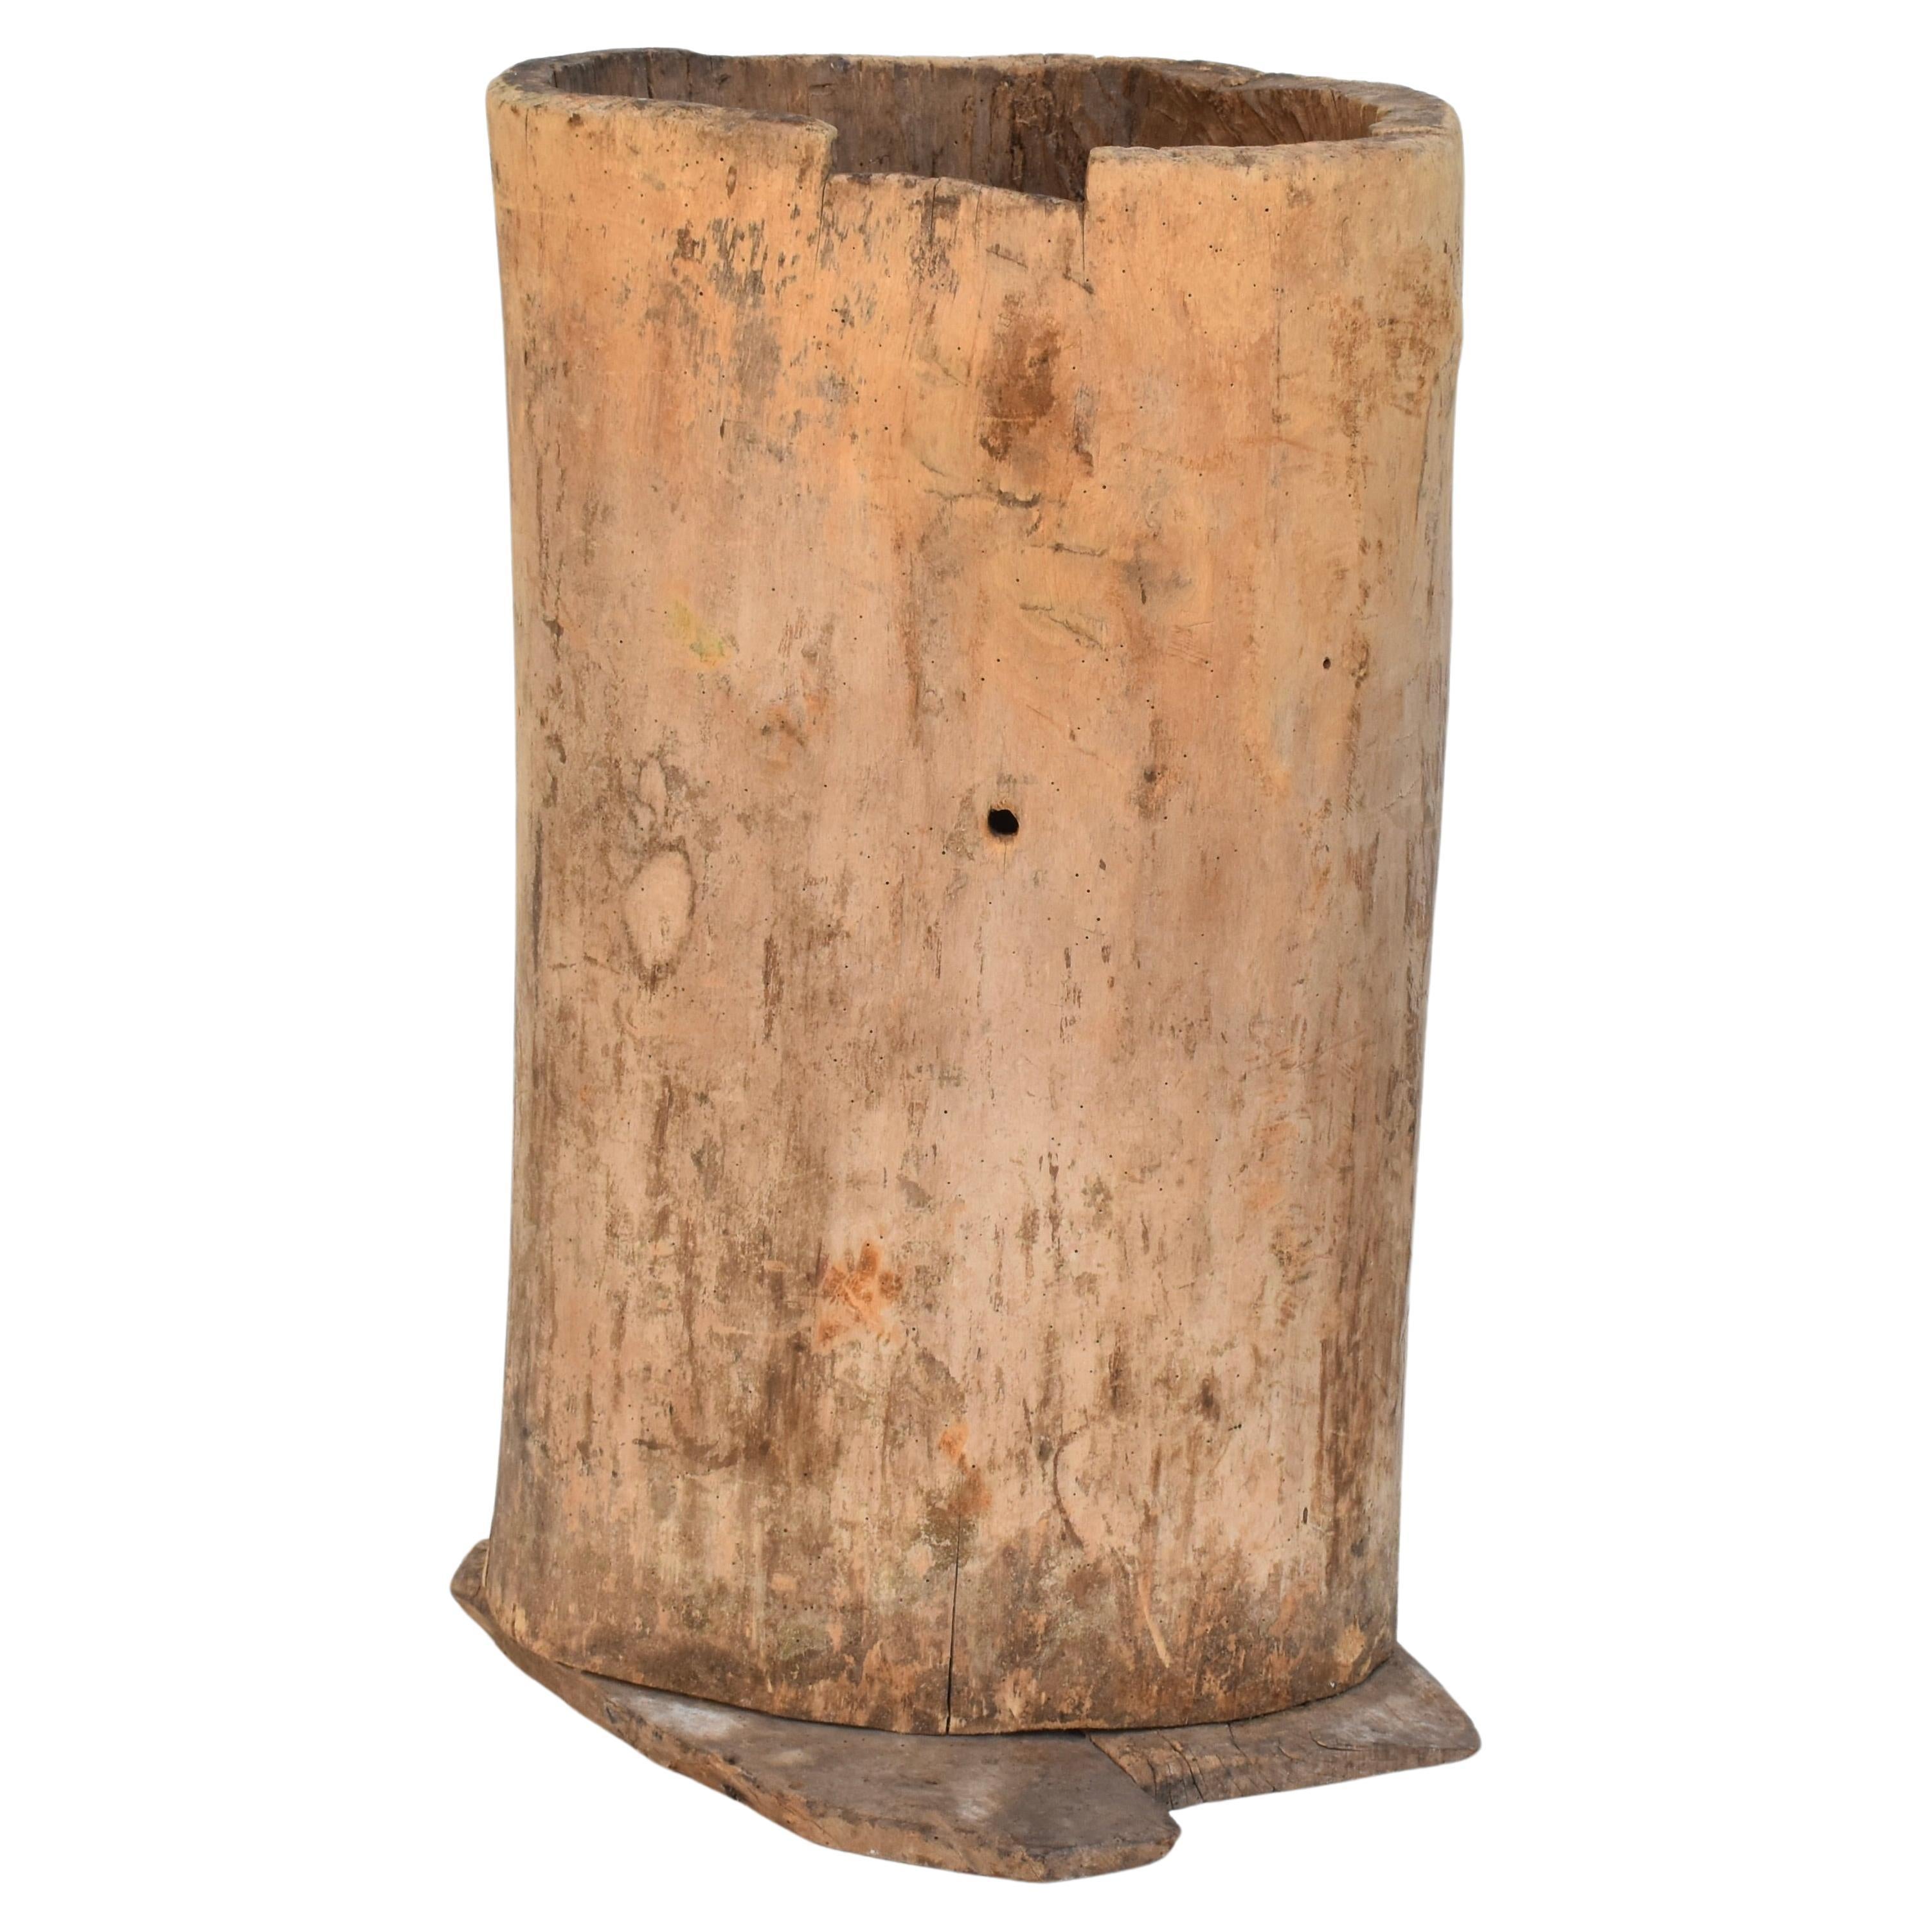 French Antique Hollowed Tree Trunk Wooden Planter Vessel, Late 19th C. France For Sale